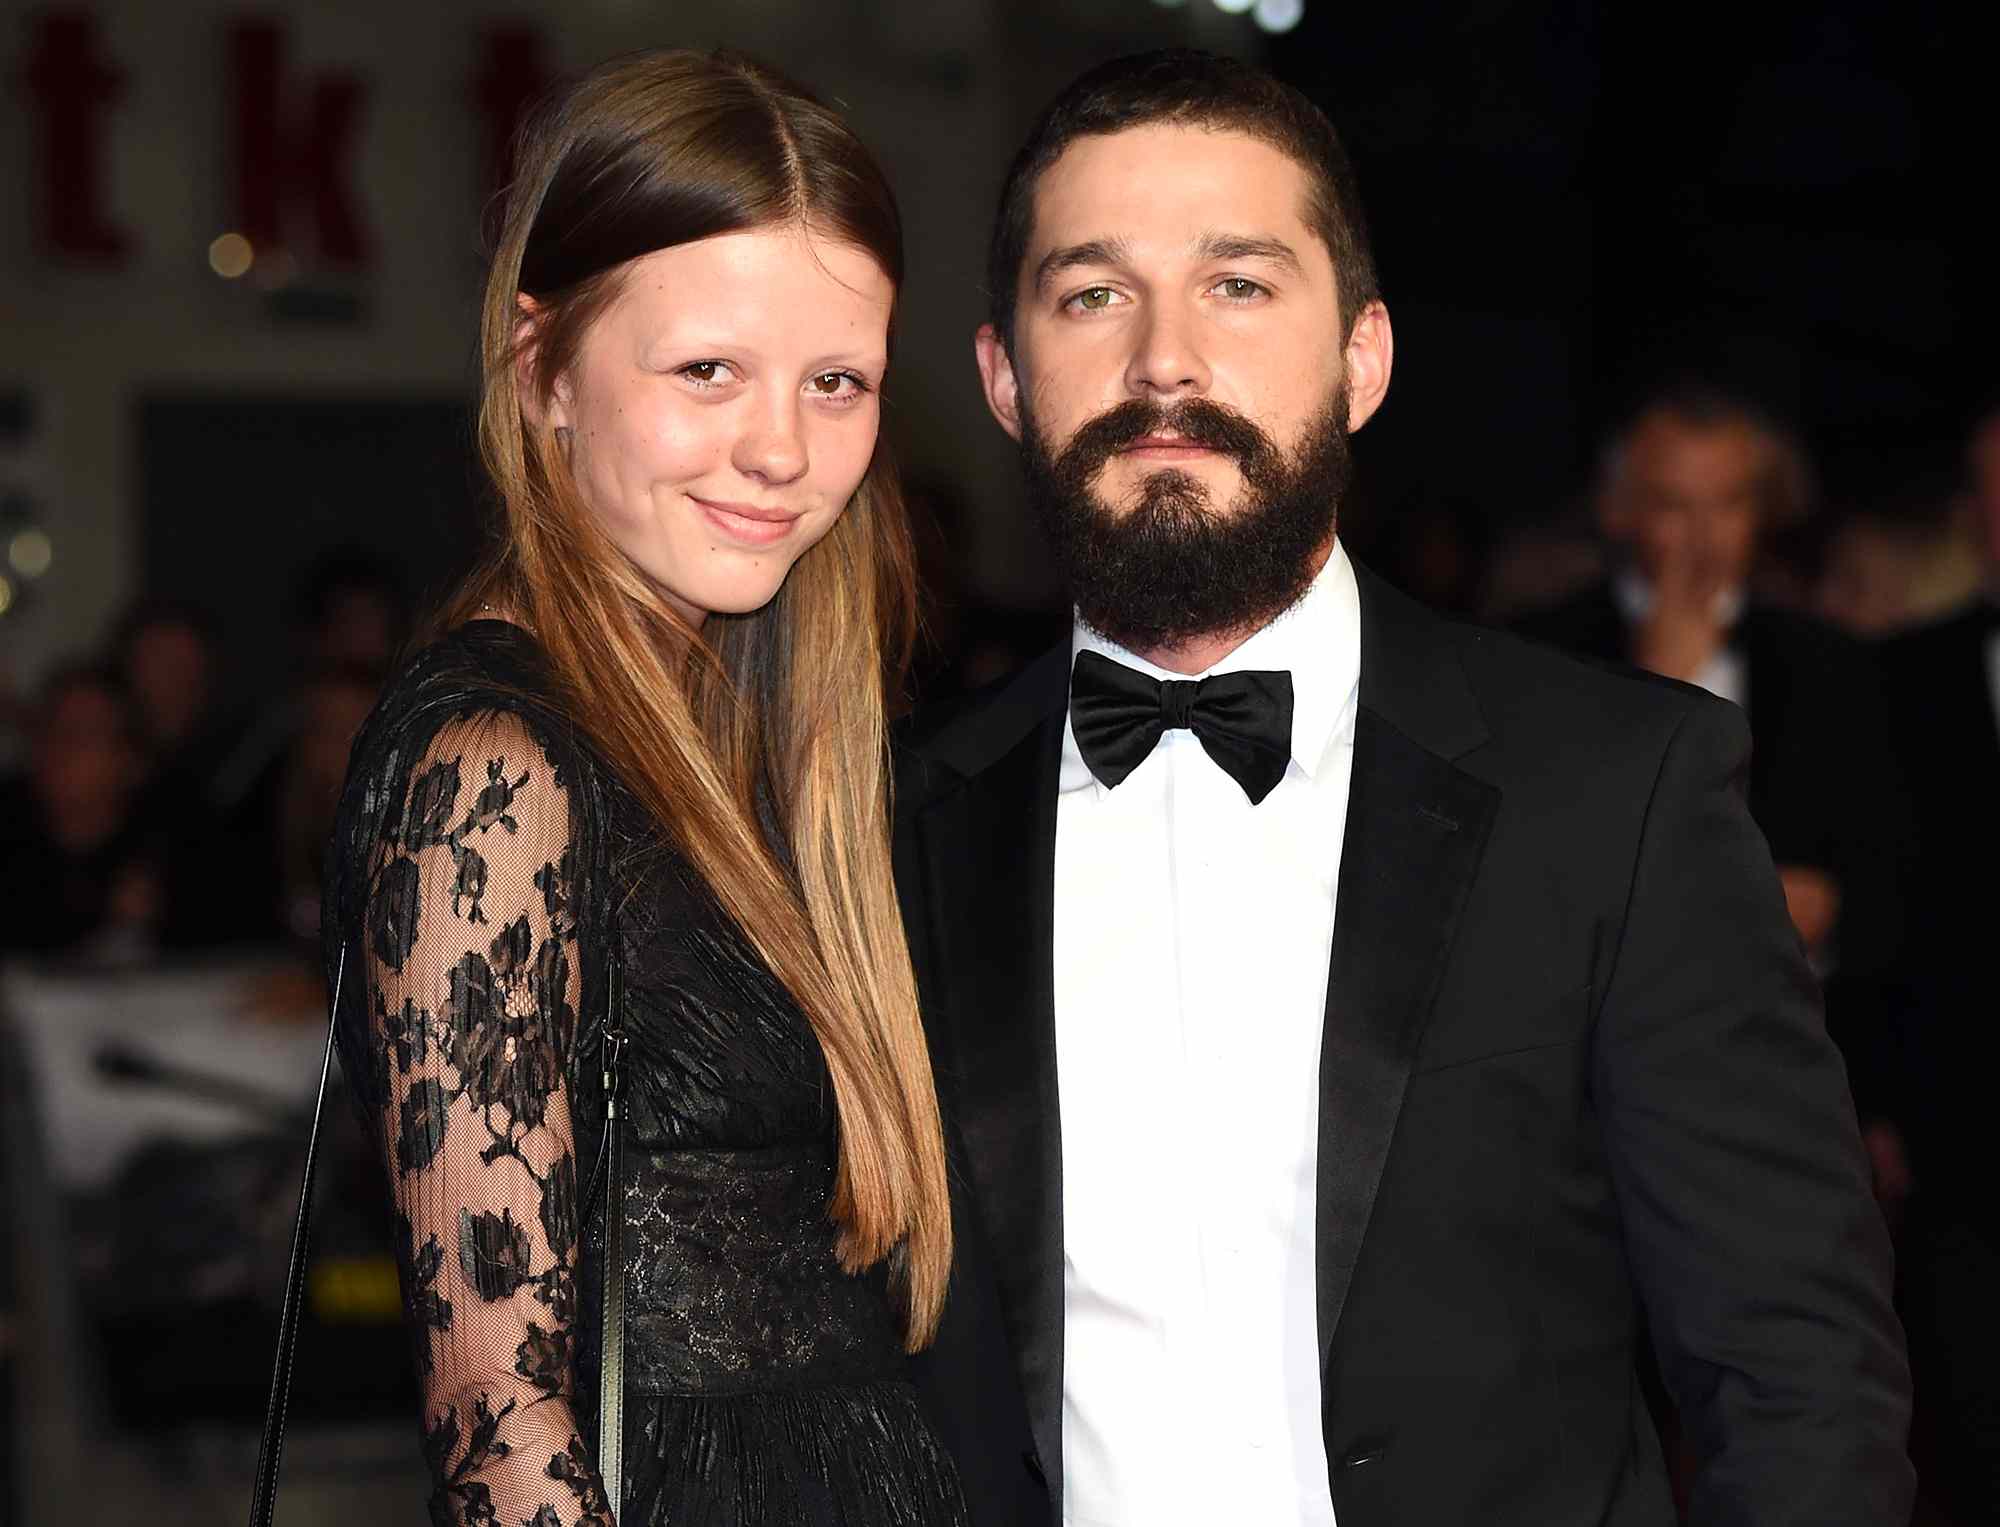 Shia LaBeouf and Mia Goth's Relationship Timeline